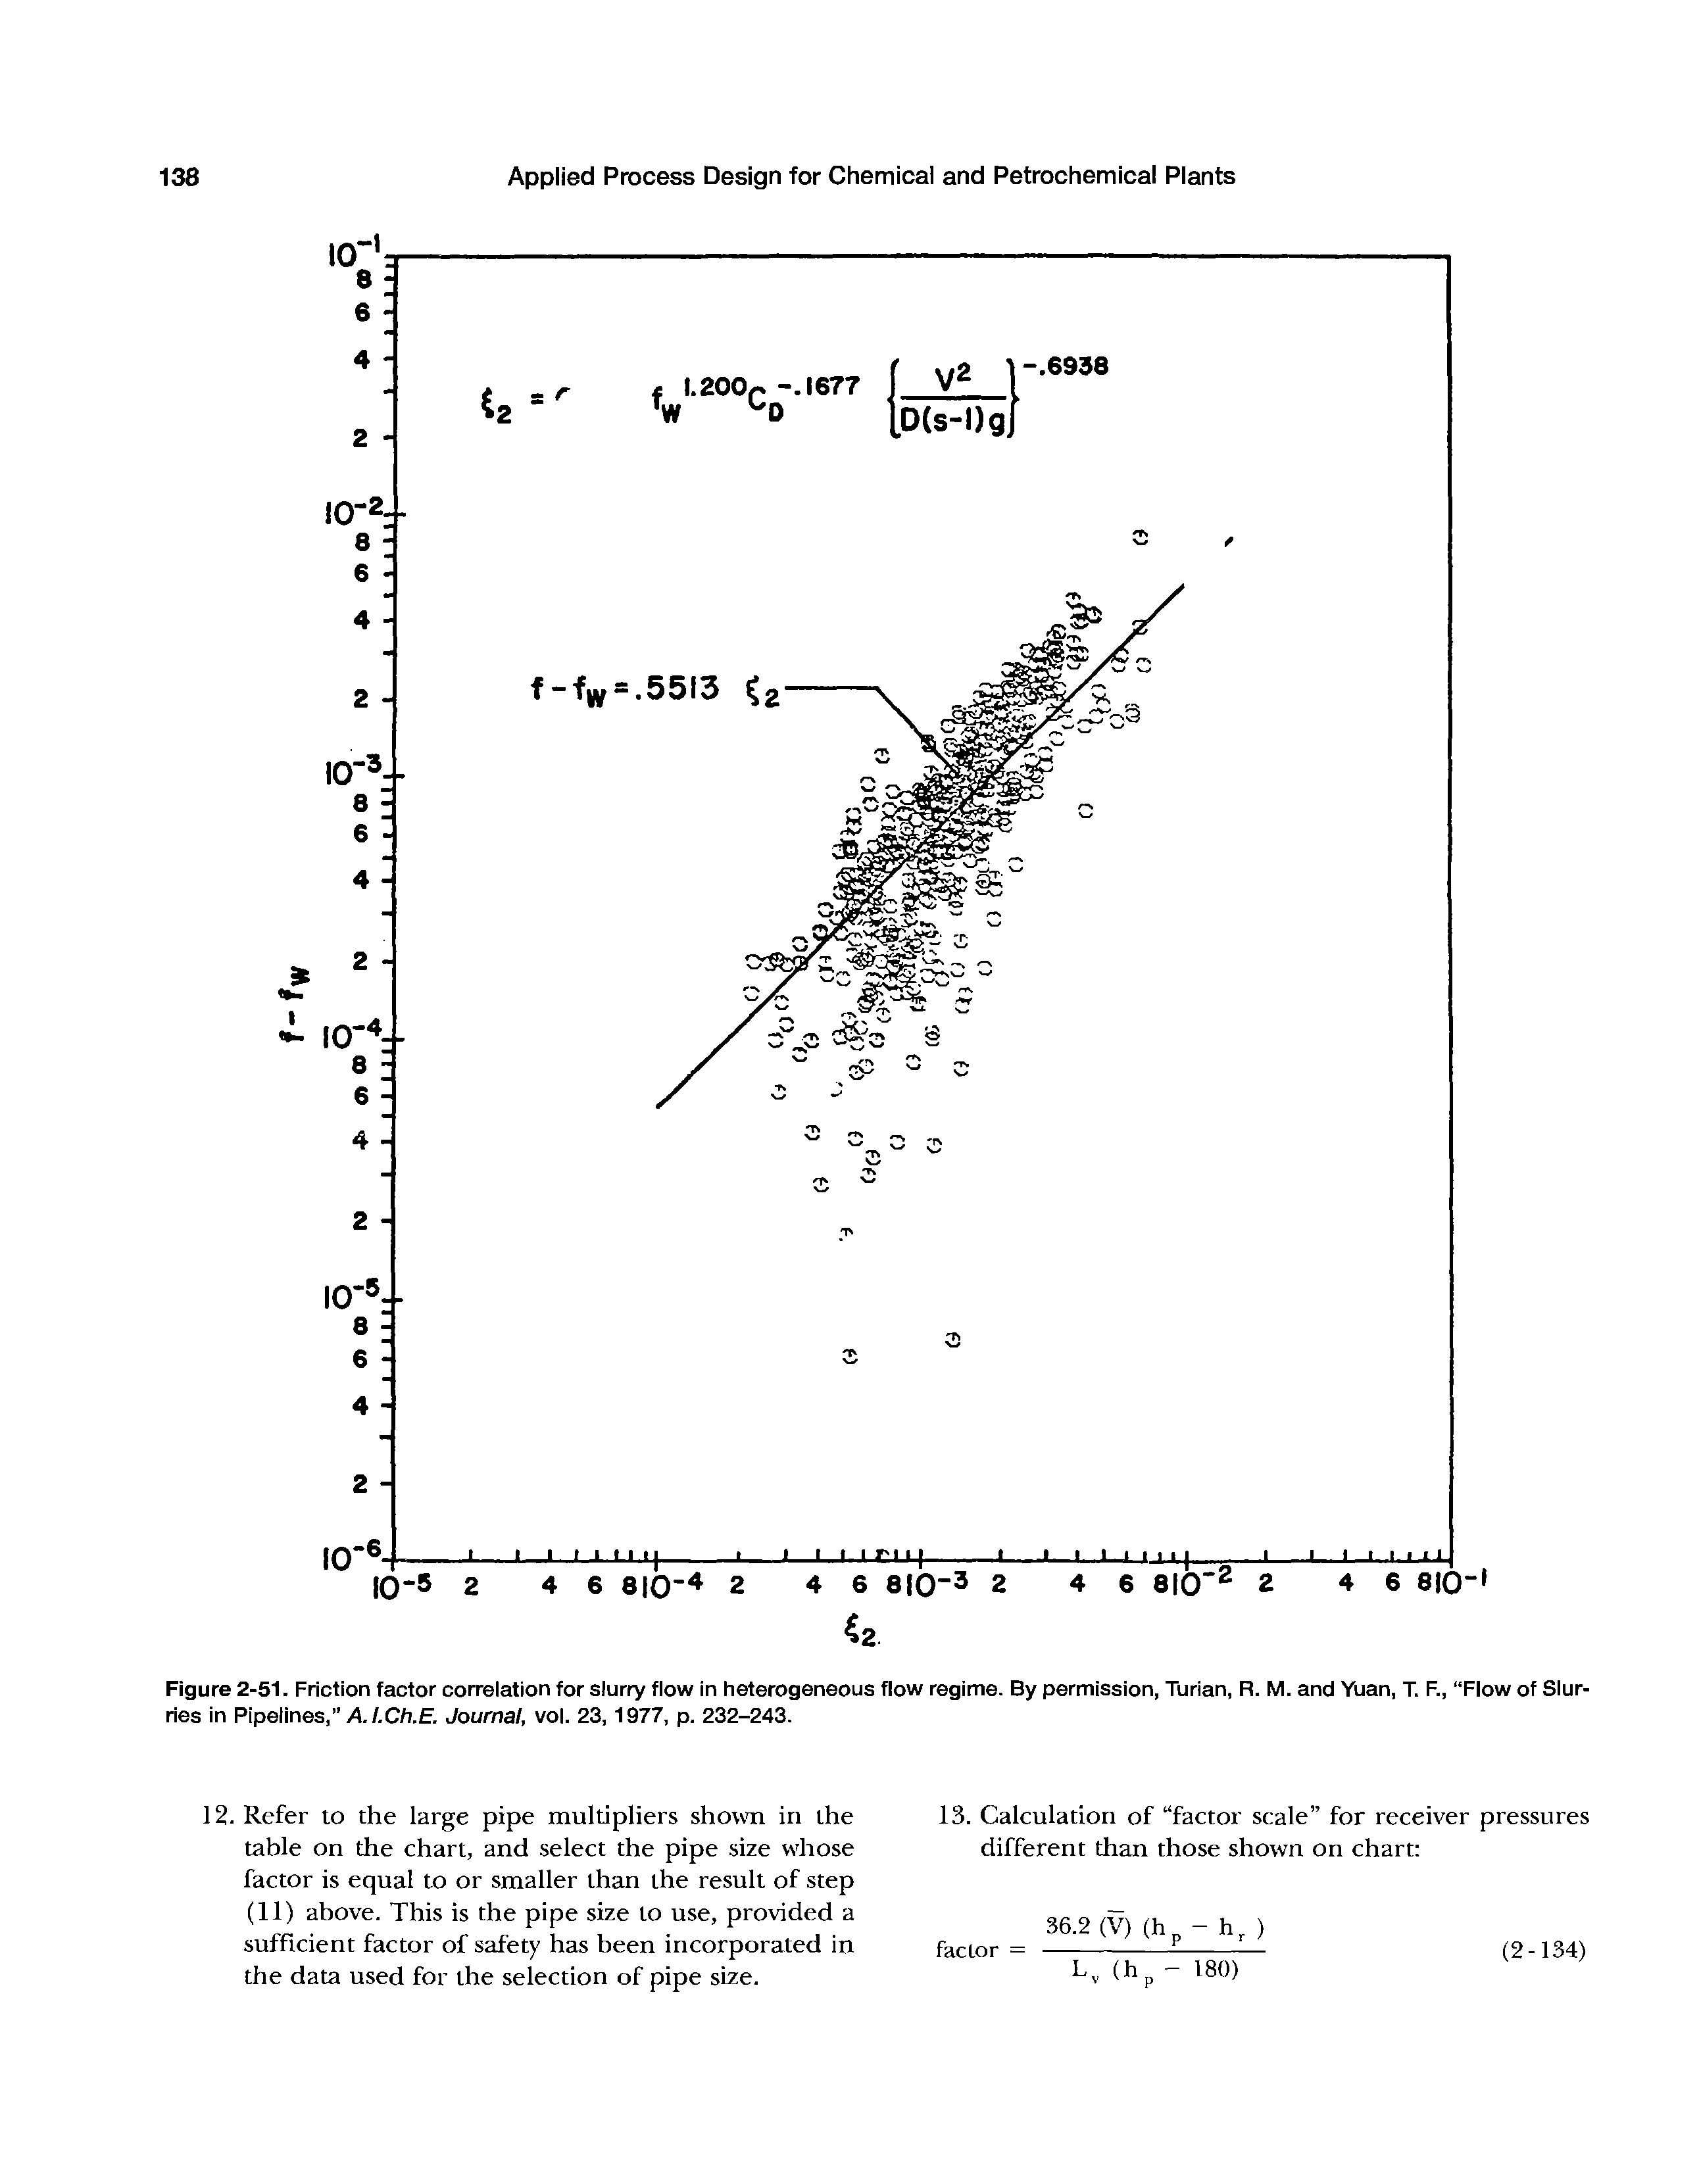 Figure 2-51. Friction factor correlation for slurry flow in heterogeneous flow regime. By permission, Turian, R. M. and Yuan, T. F., Flow of Slurries in Pipelines, A/.Ch.E. Journal, vol. 23, 1977, p. 232-243.